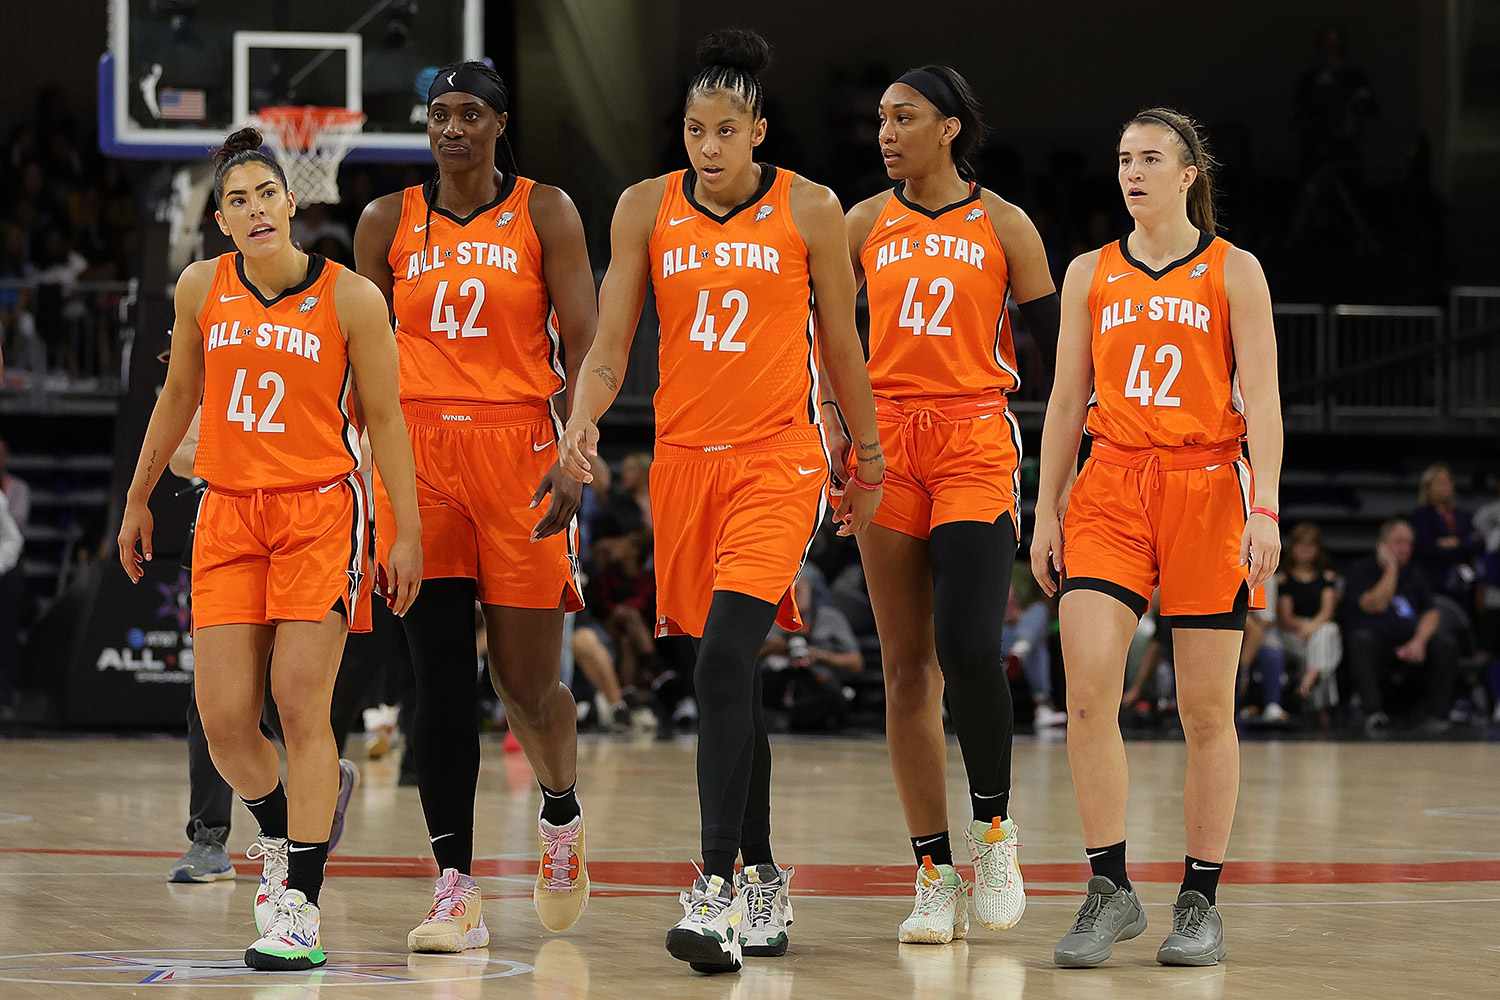 WNBA all-stars wore Brittney Griner's jersey during the game